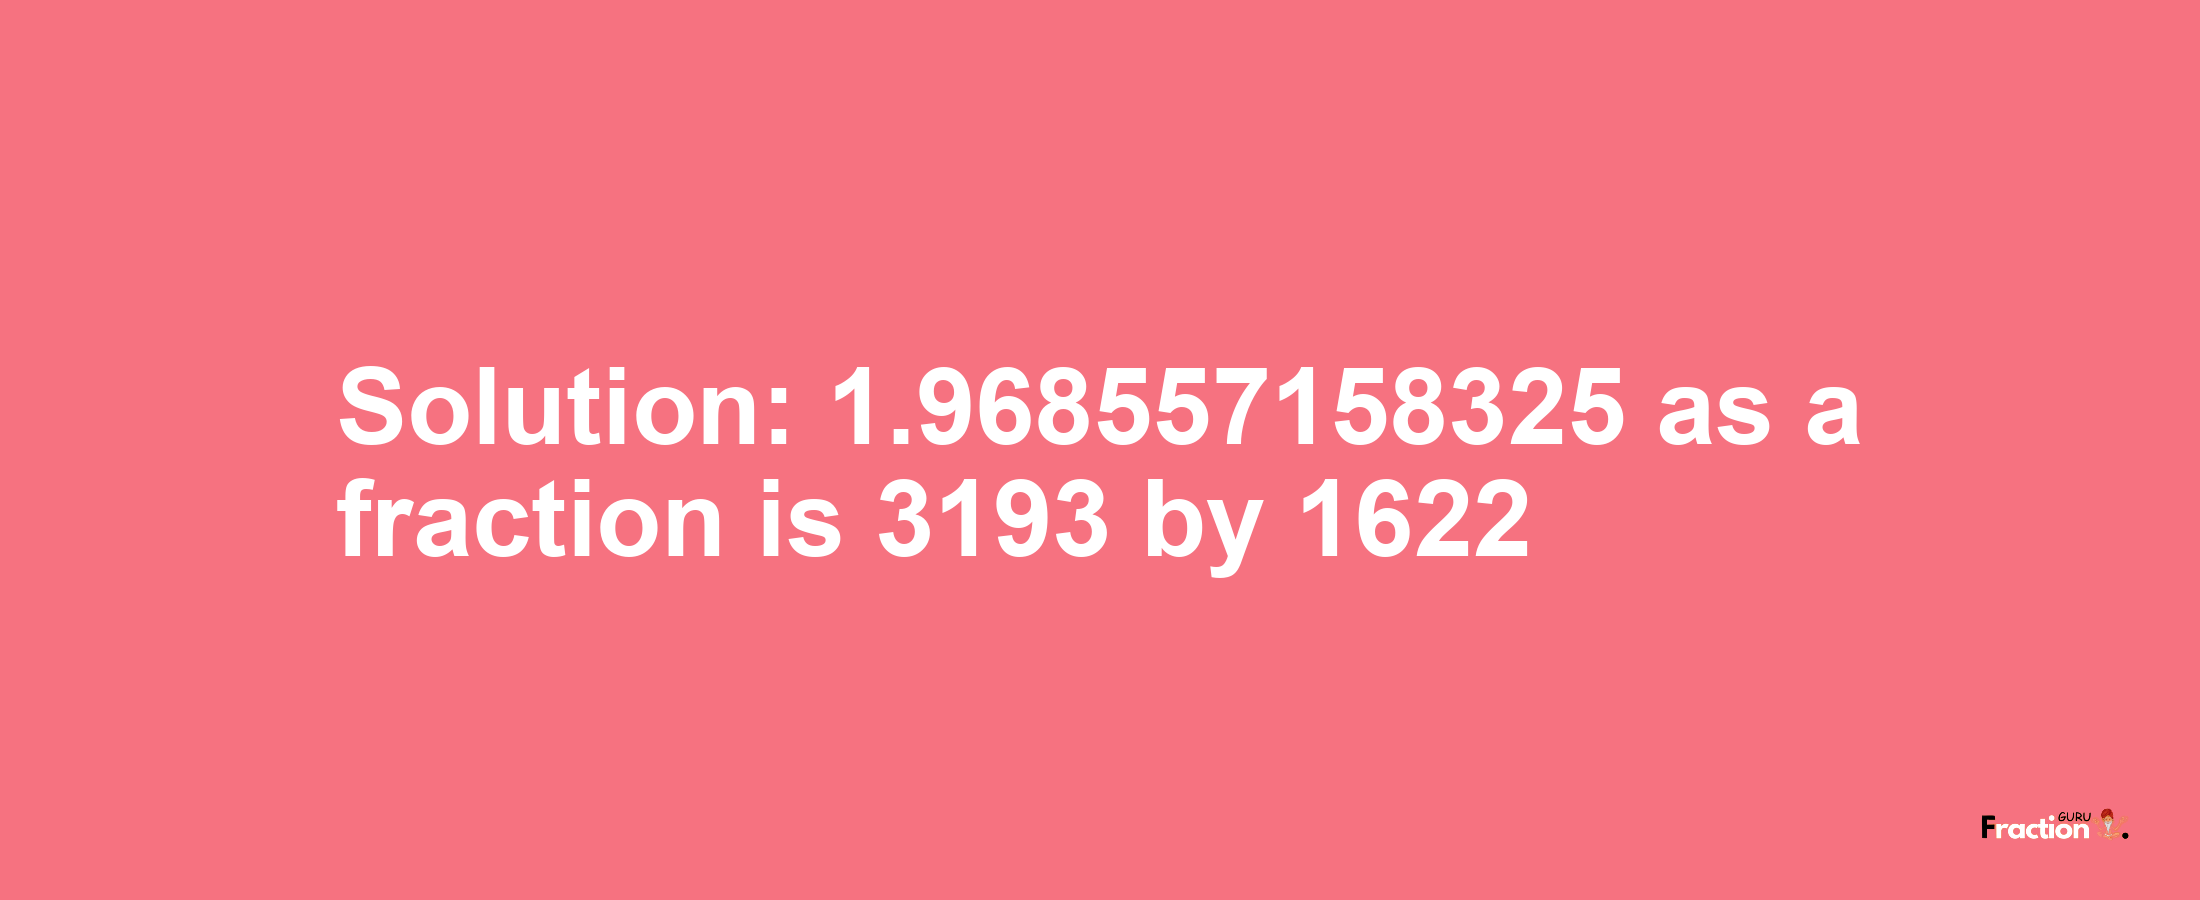 Solution:1.968557158325 as a fraction is 3193/1622